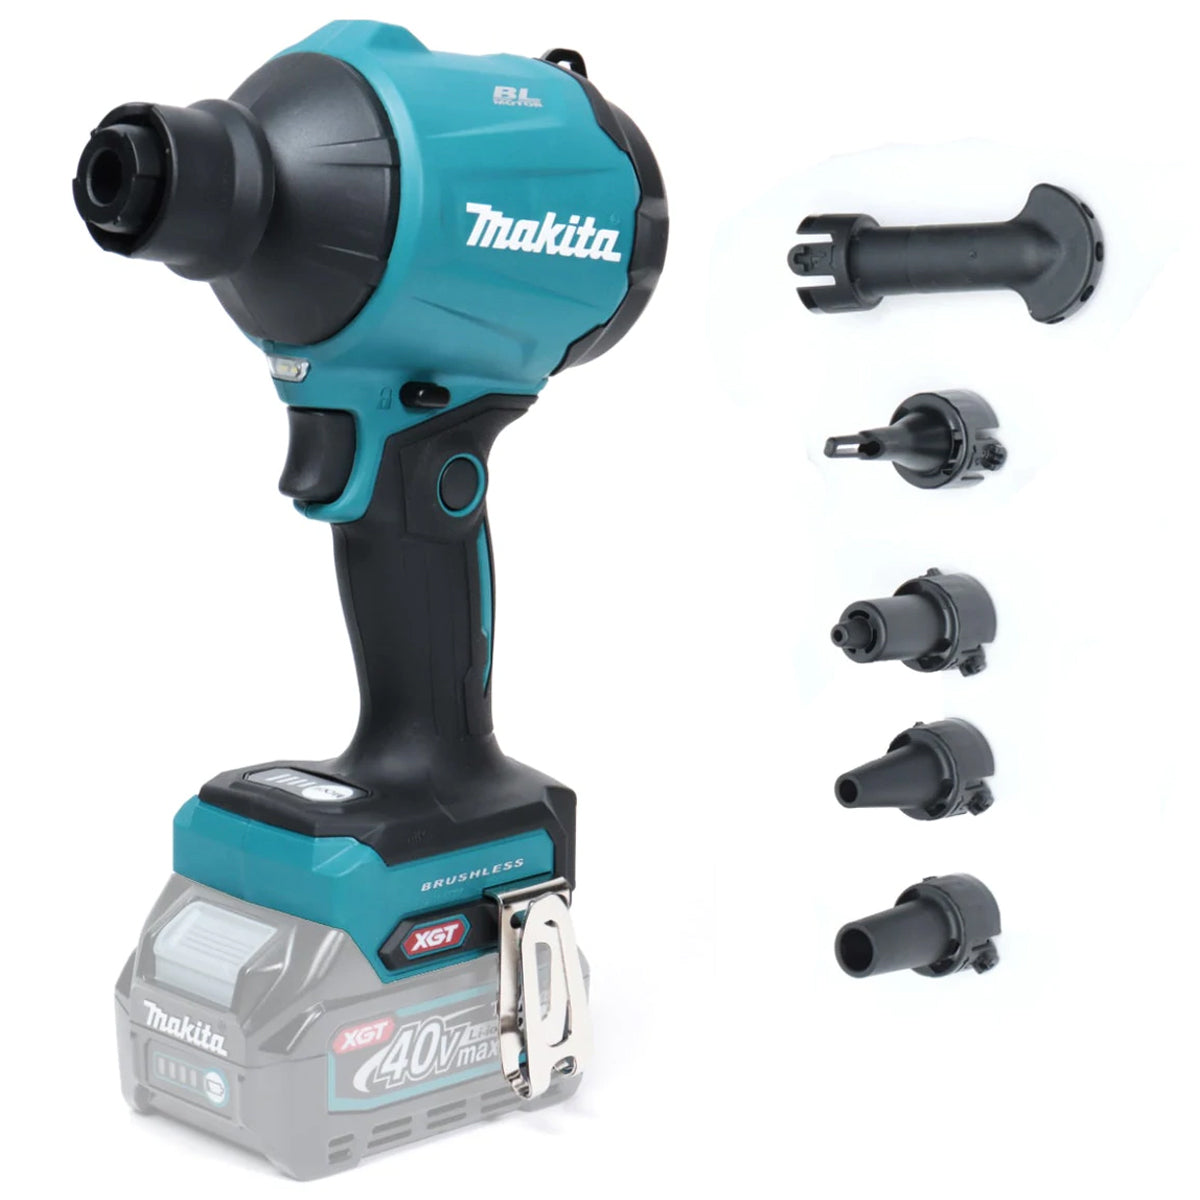 Makita AS001GZ 40V Max XGT Brushless Dust Blower Body Only